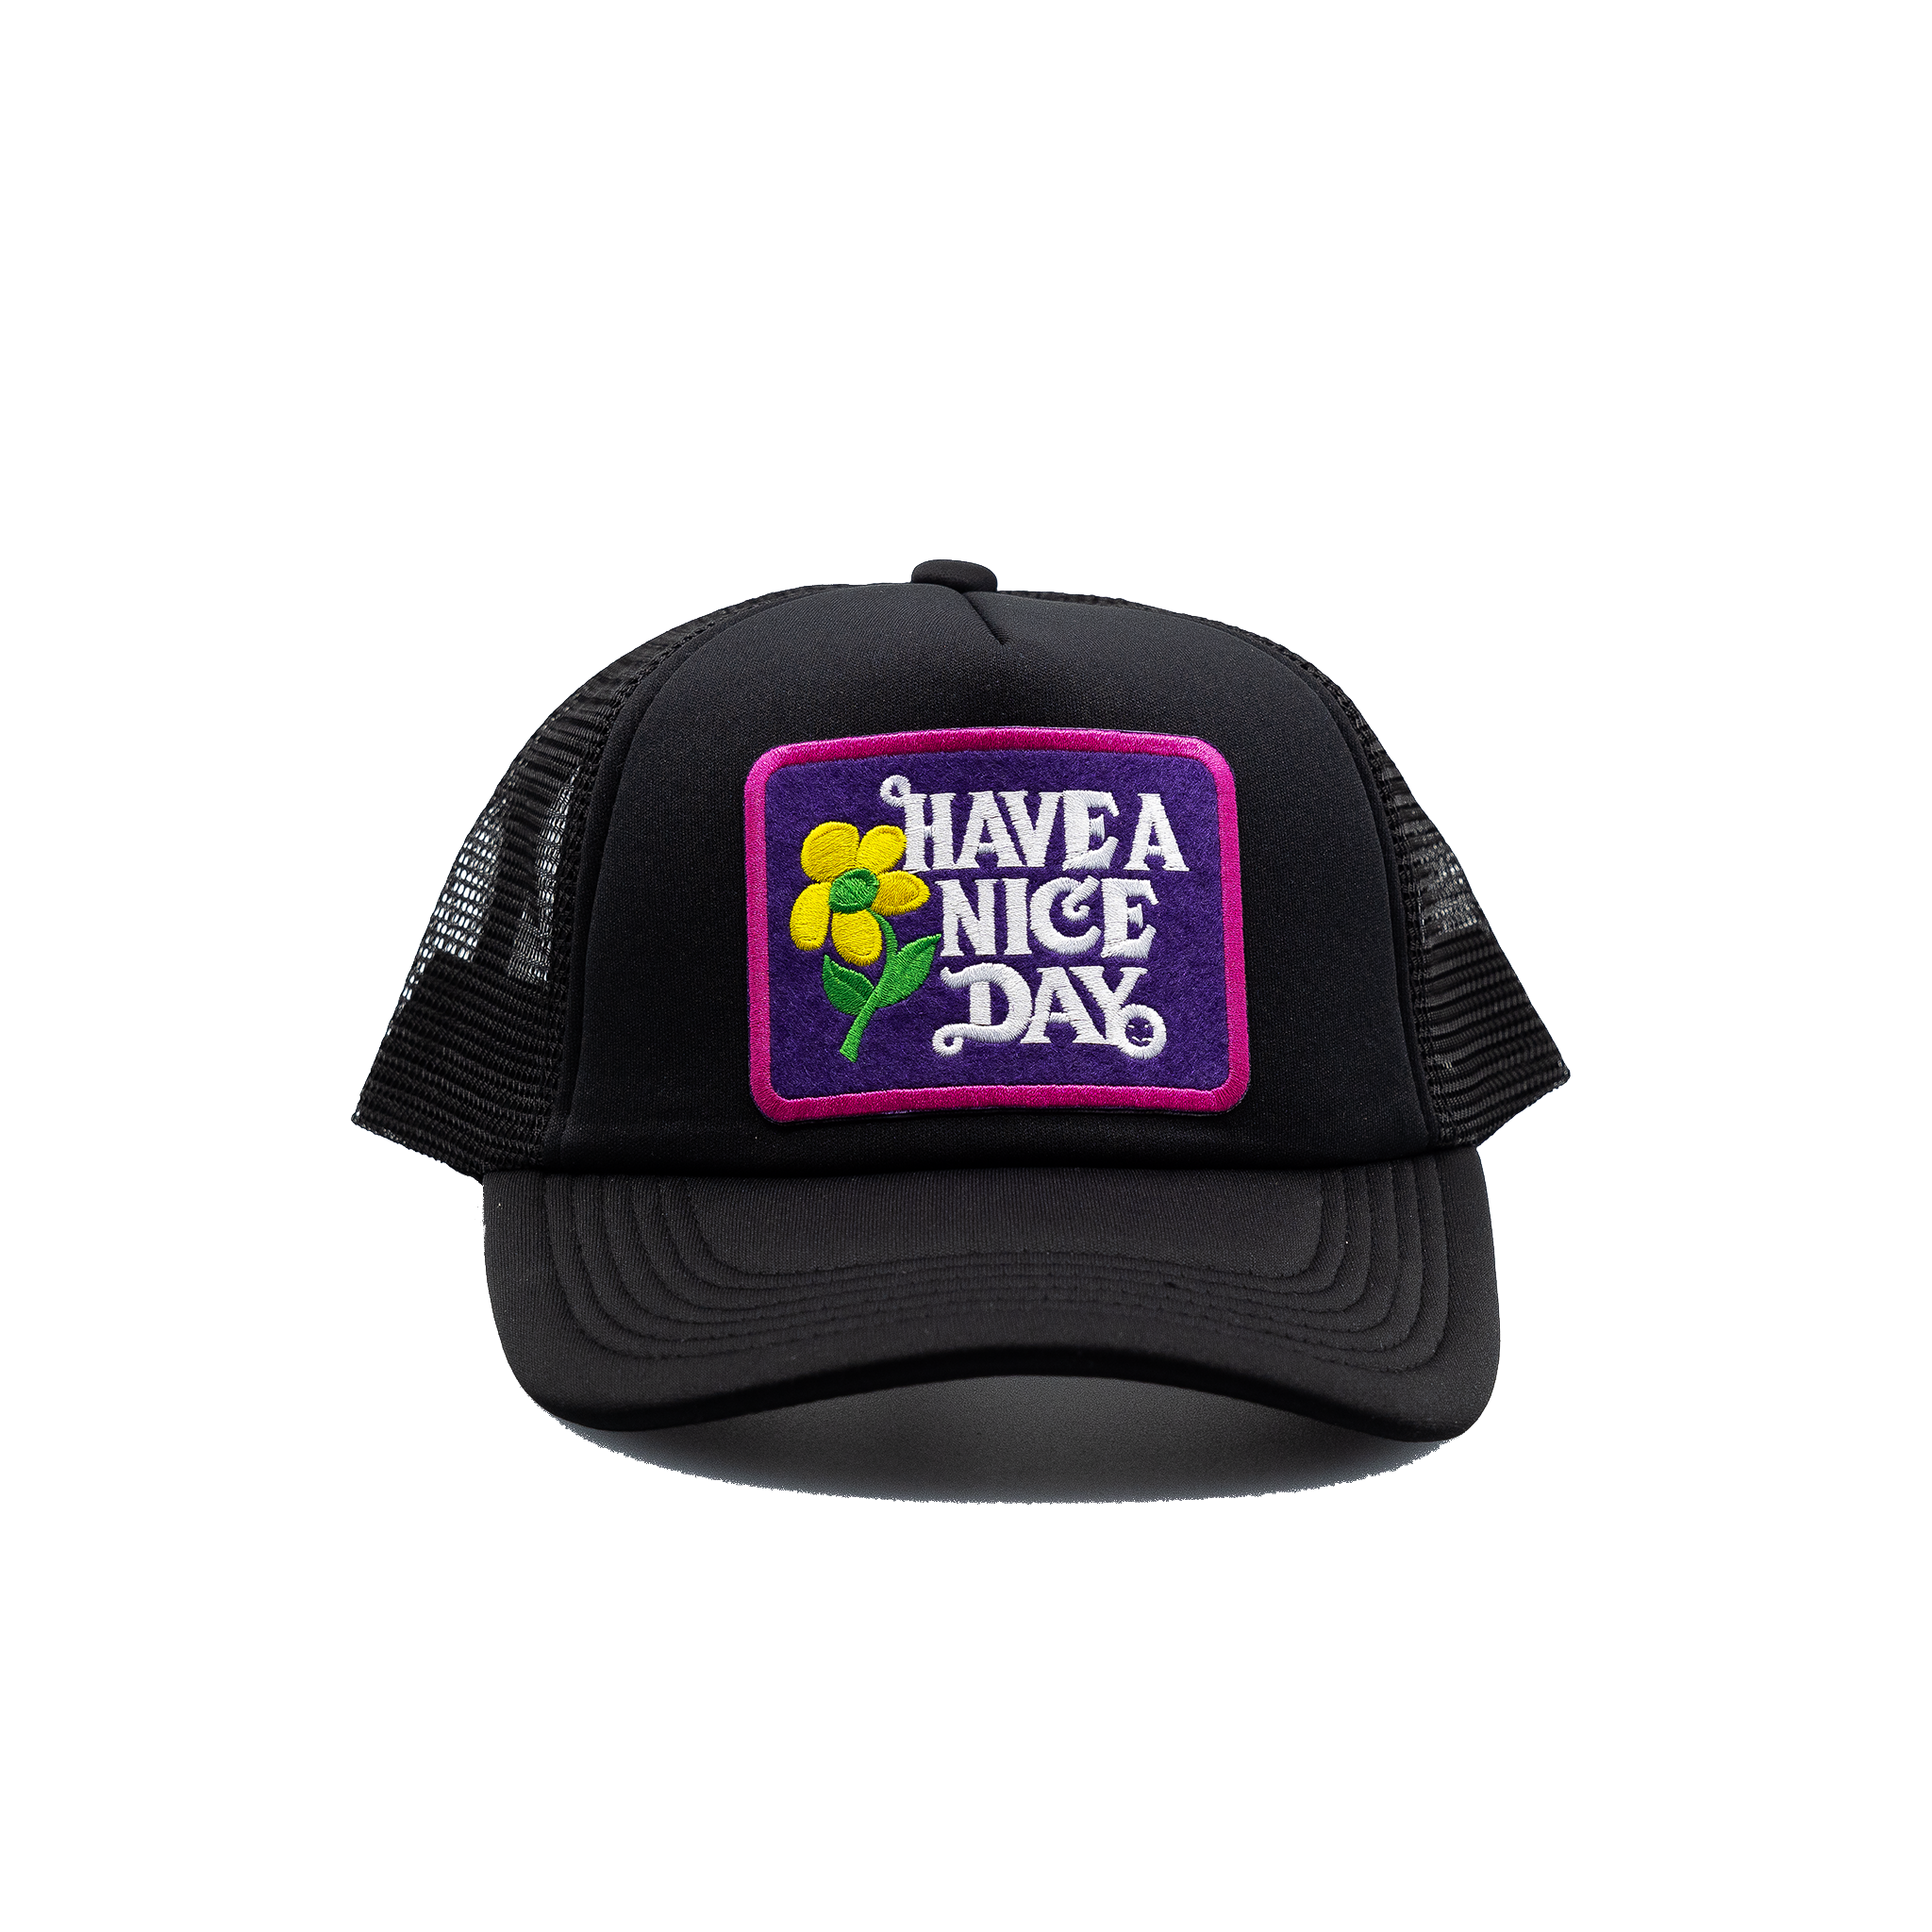 Have a Nice Day Style 5 Brown Trucker Hat